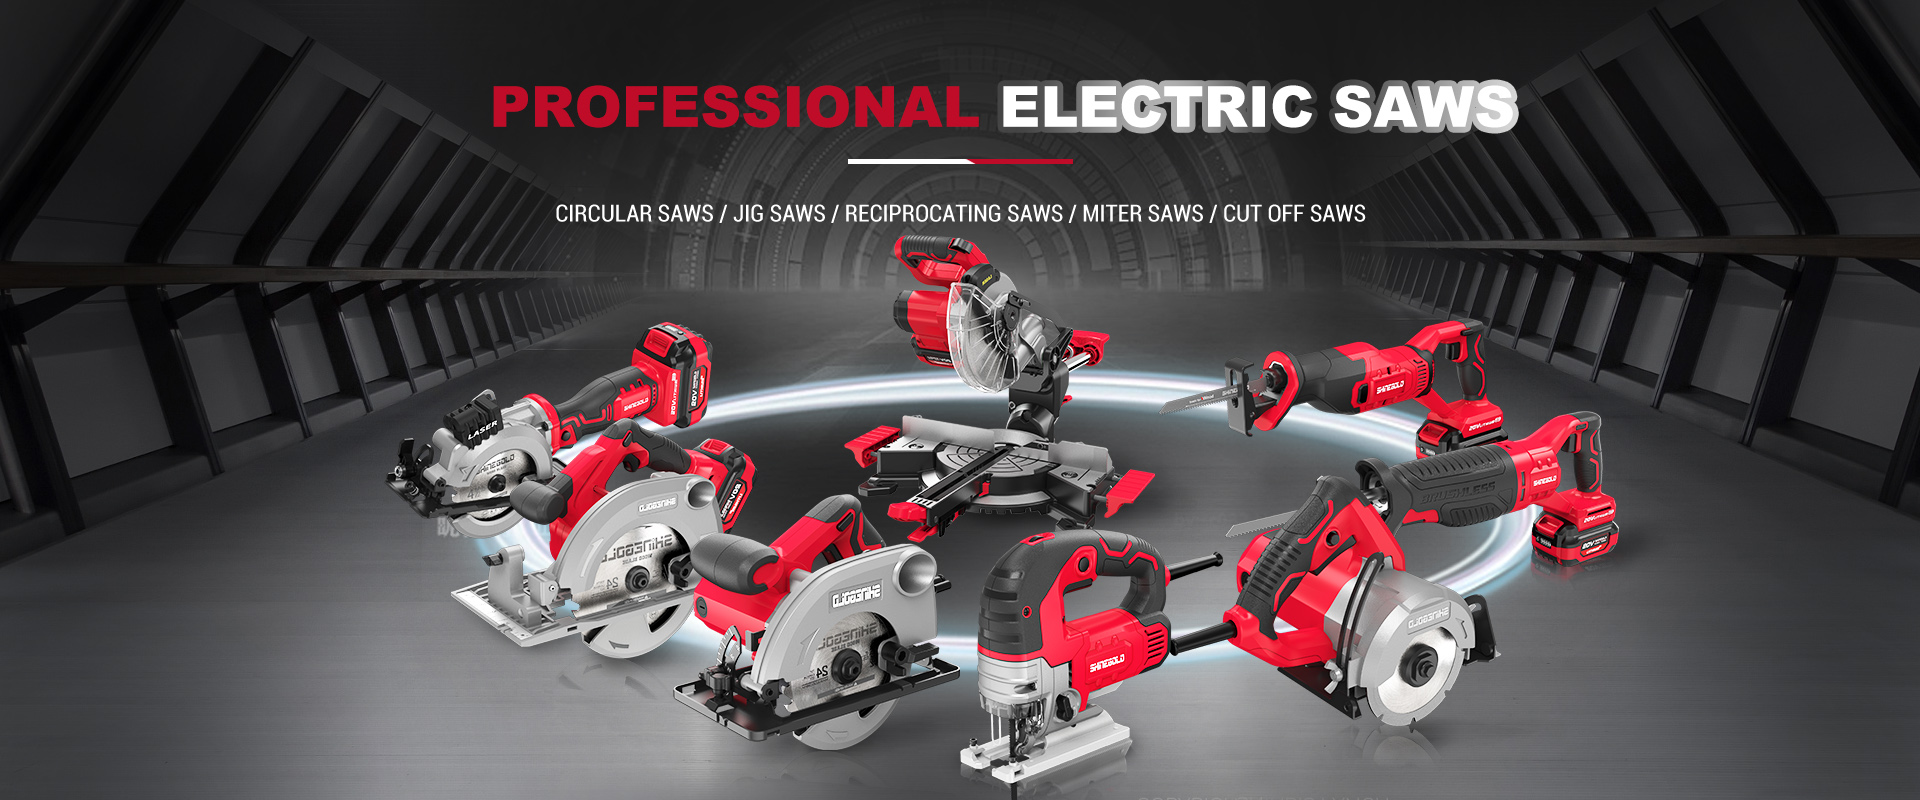 Electric Saws Manufacturer